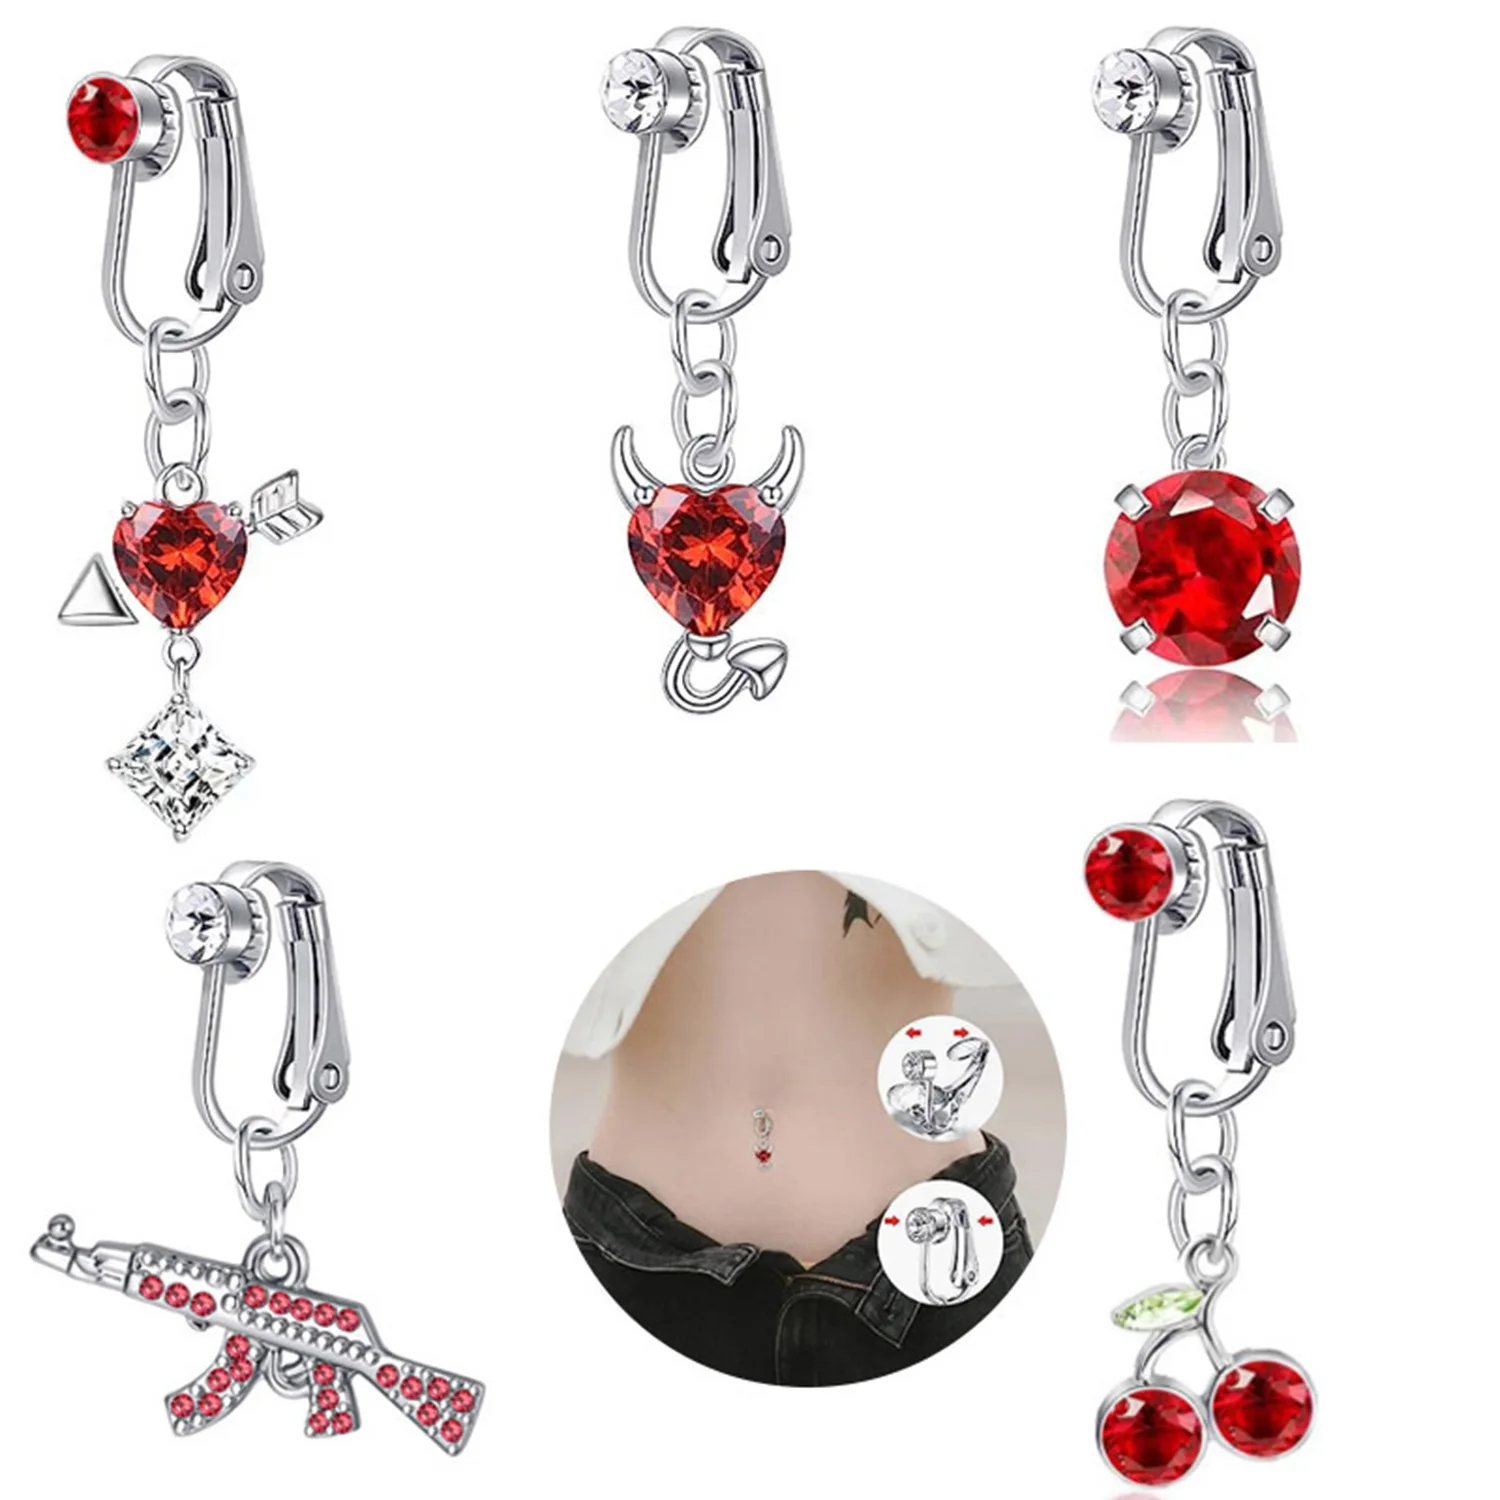 

1PC Fake Belly Ring Fake Piercing Heart Clip On Umbilical Non Navel Fake Pircing Red Crystal Cartilage Earring Clip Body Jewelry